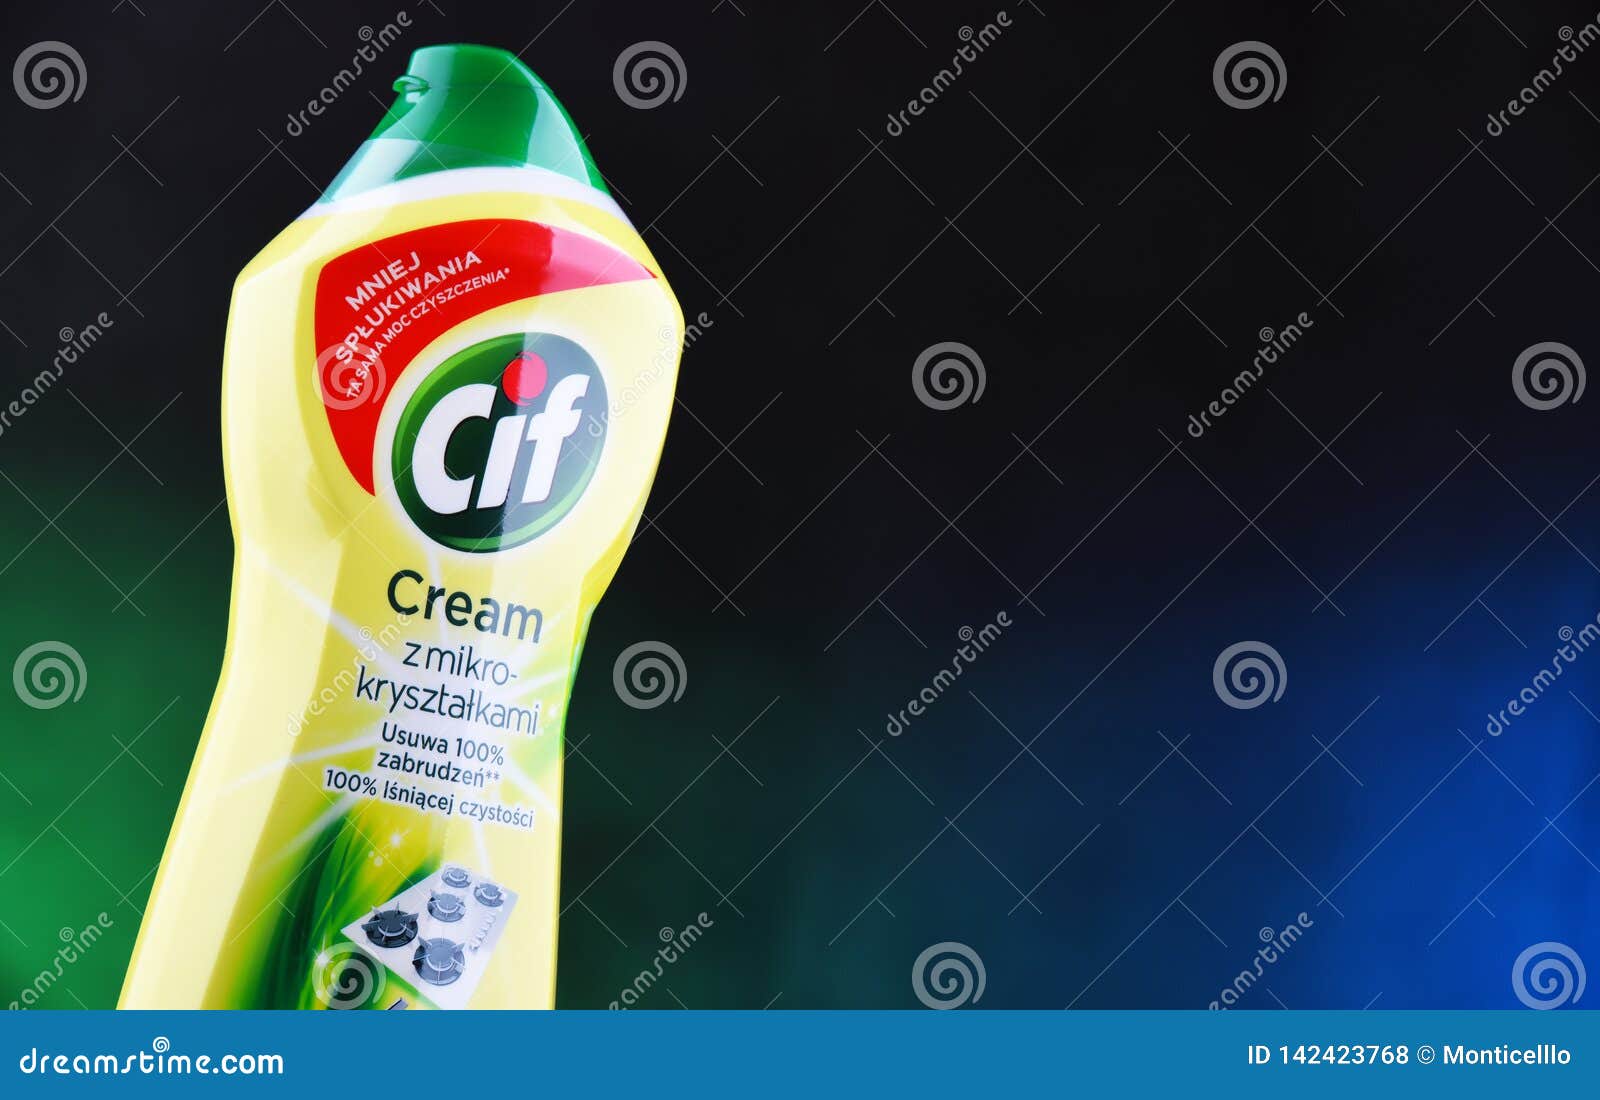 Container Of Cif Products By Unilever Editorial Stock Photo Image Of Logo Global 142423768